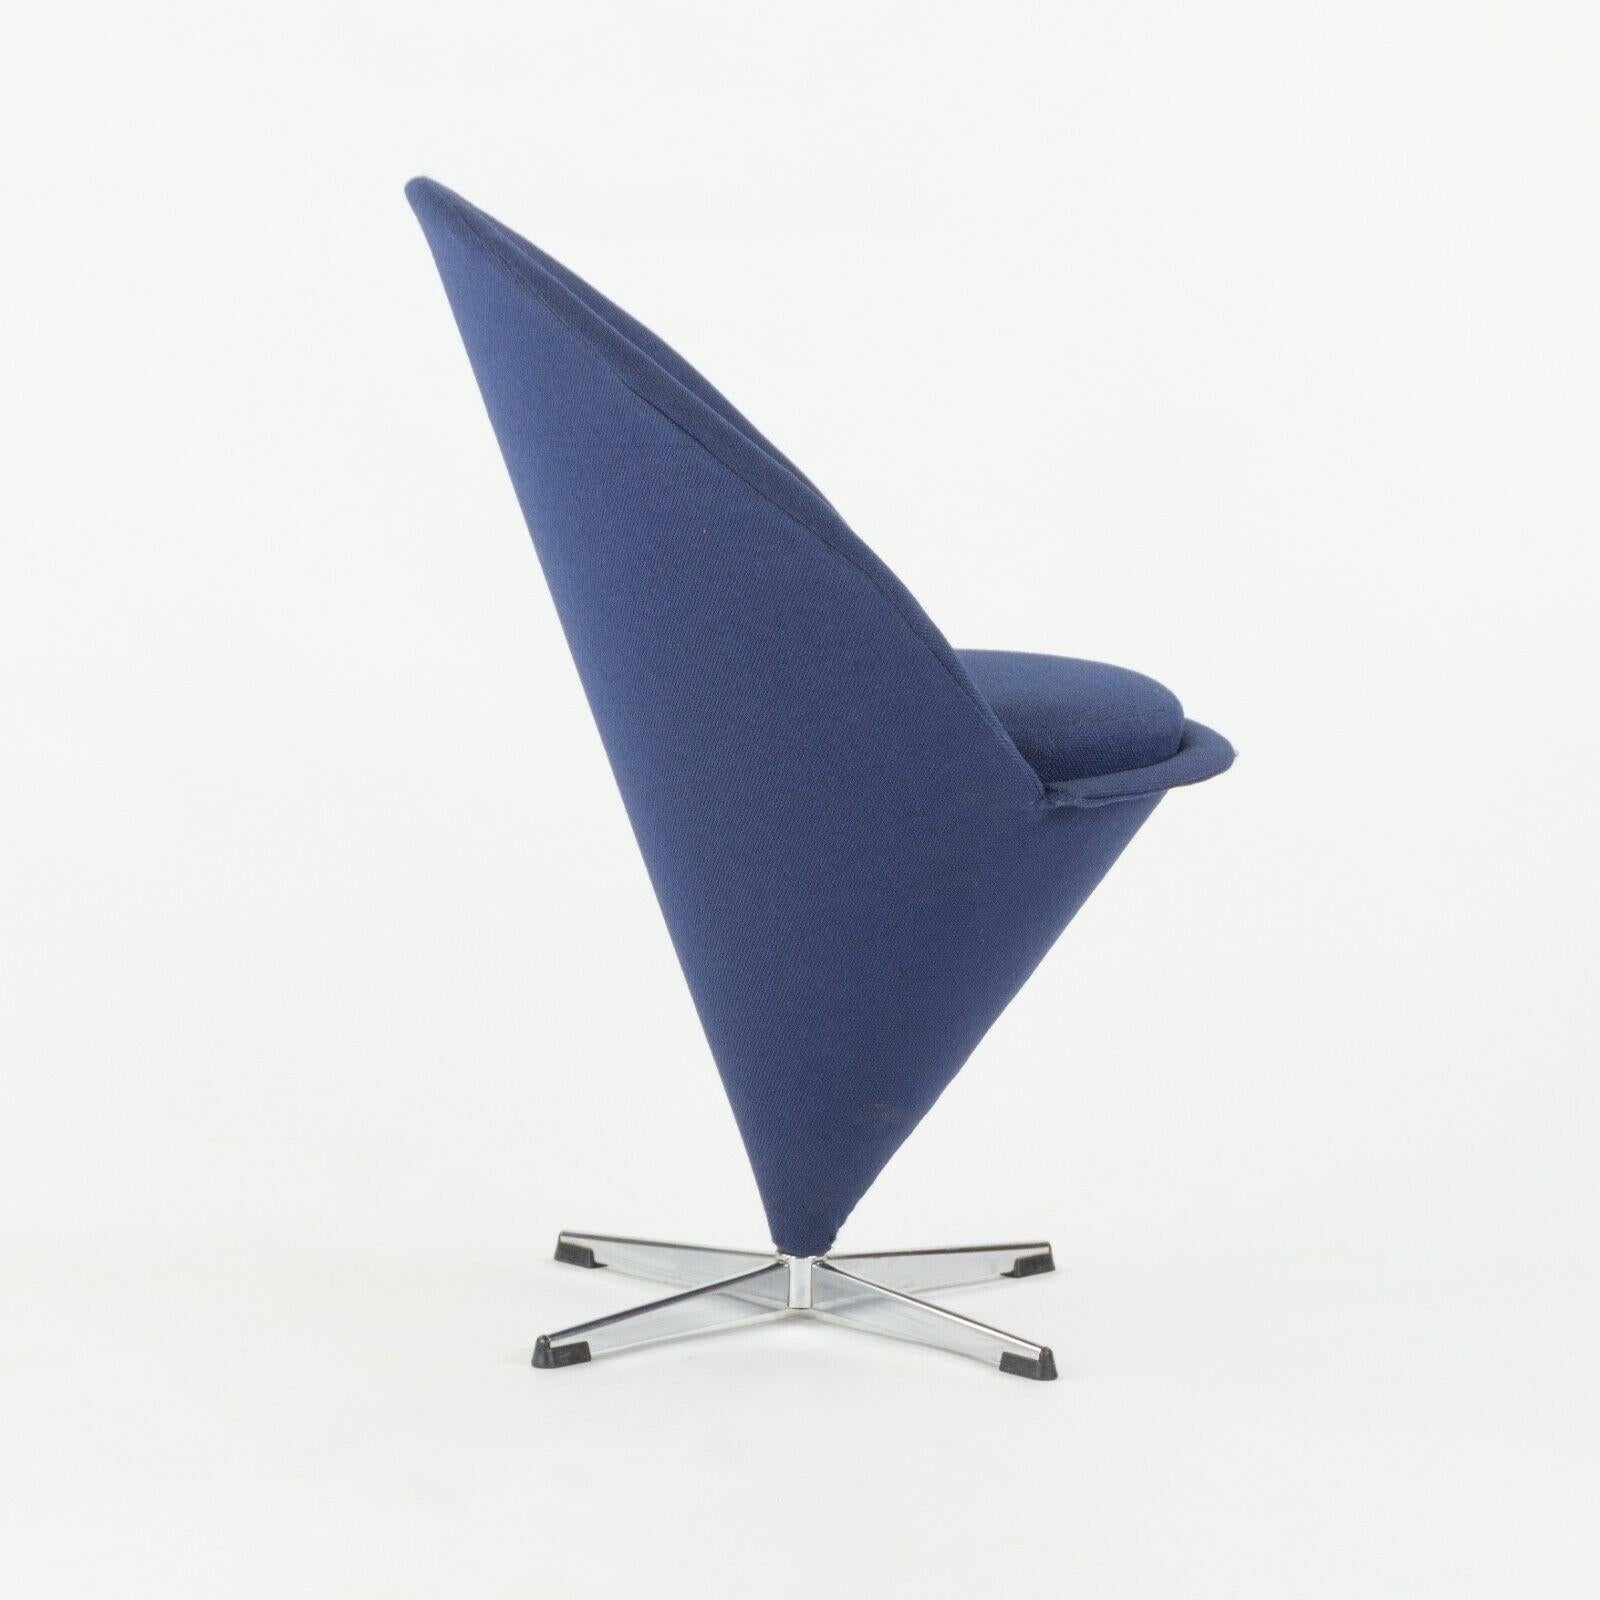 Danish 1960s Verner Panton Cone Chair Blue Fabric Made in Denmark for Plus-Linje Vitra